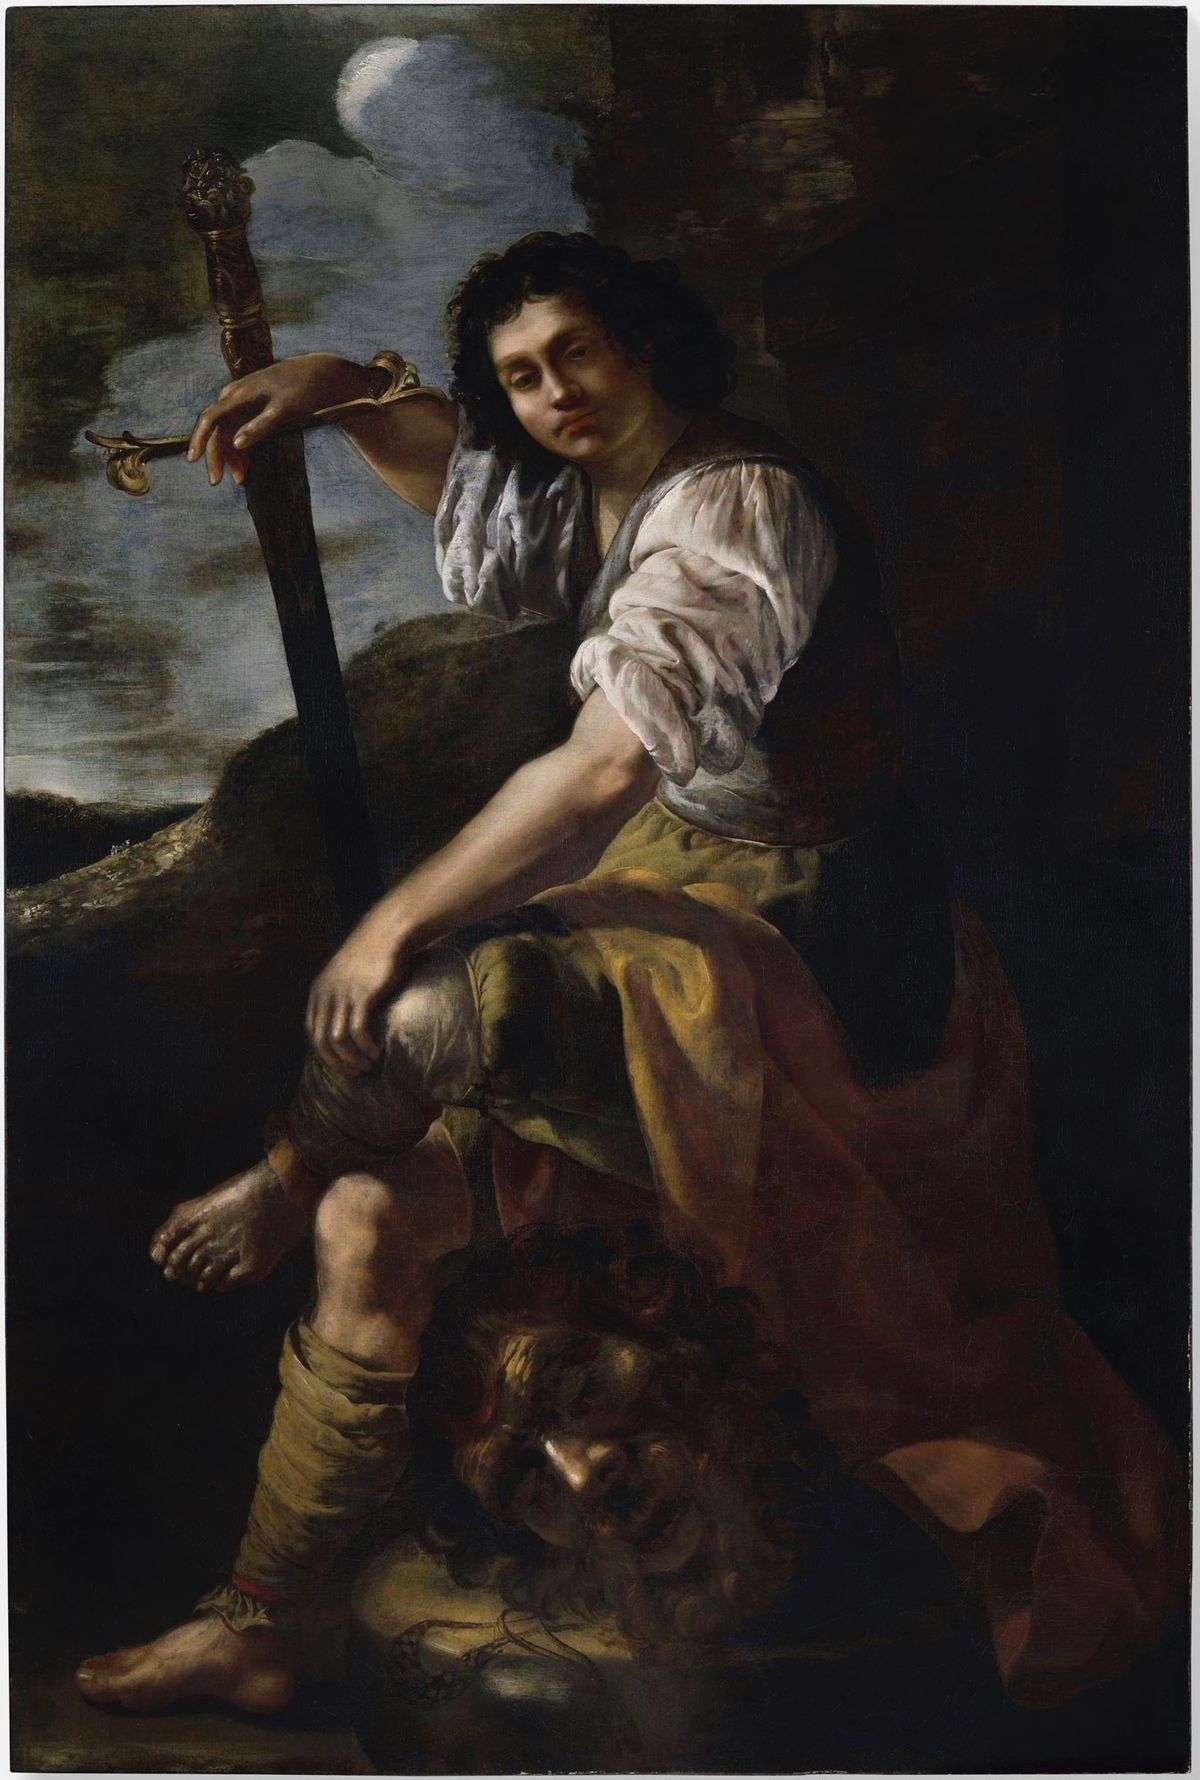 The newly attributed painting of David and Goliath, dated to the late 1630s, has been unveiled in London after restoration Photo: courtesy of Simon Gillespie Studio